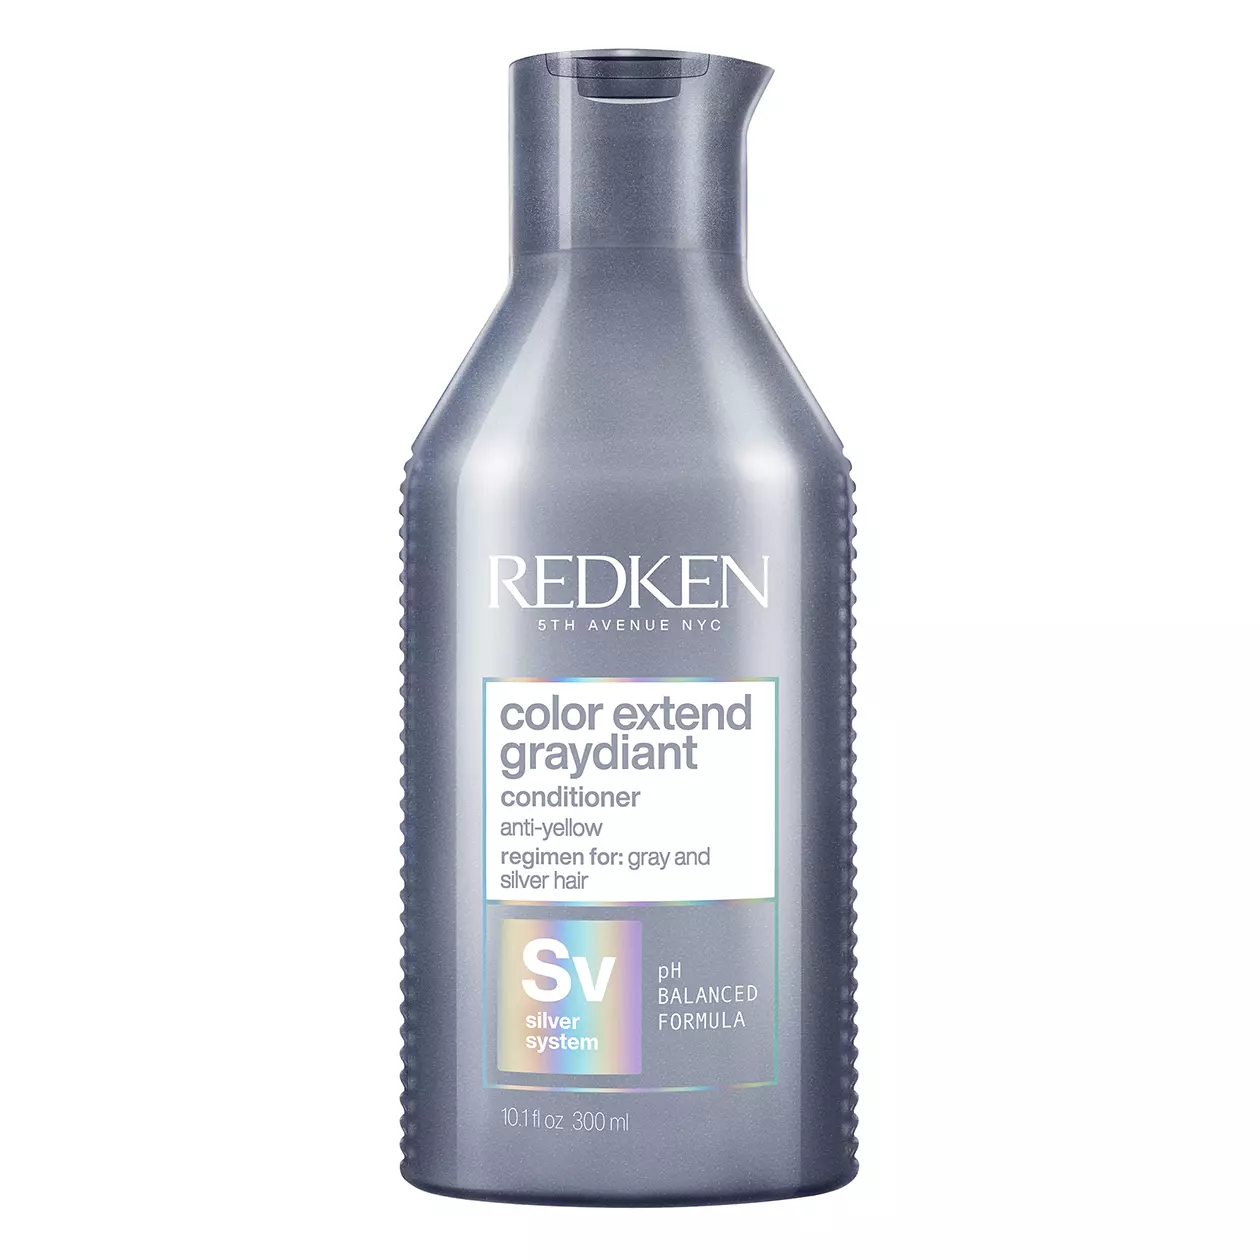 Redken Color Extend Graydiant Conditioner | Hair Toner For Gray & Silver Hair | Removes & Tones Brass | With Amino Acids Conditioner 33.8 Fl Oz (Pack of 1)